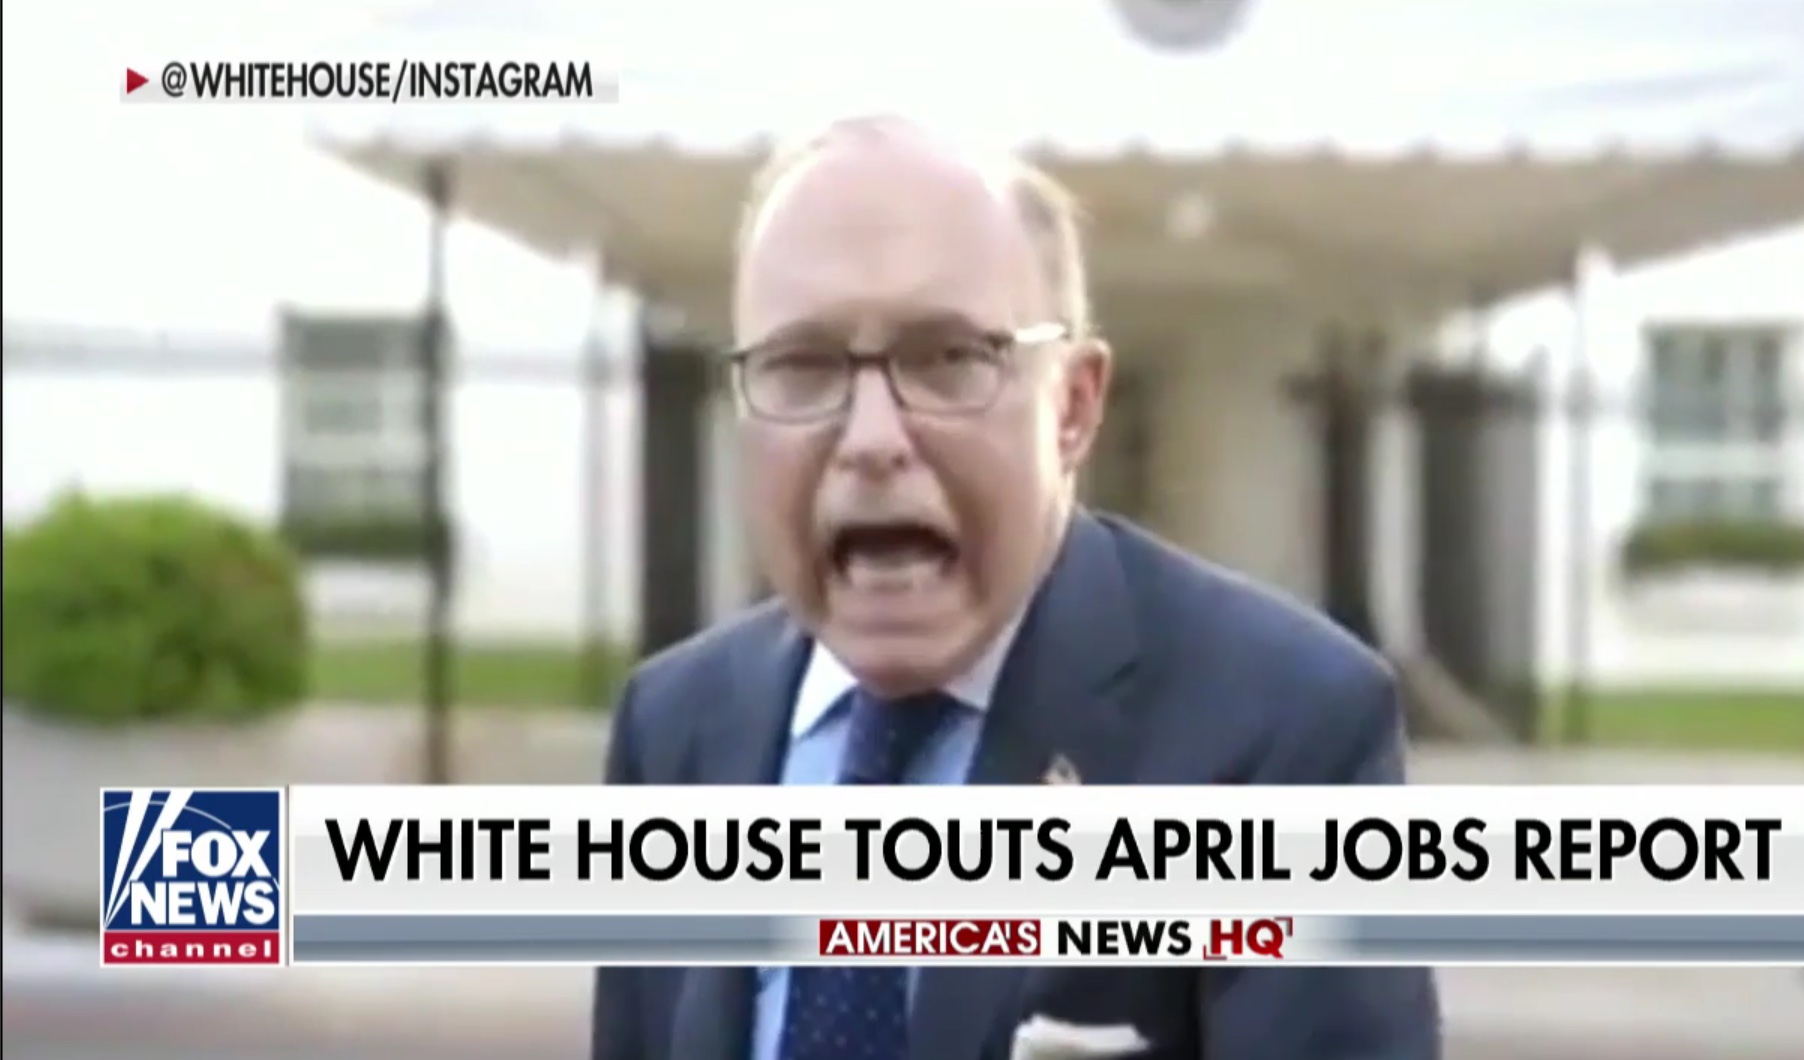 National Economic Council Director Larry Kudlow appears in White House Instagram video, May 3, 2019. Fox News screenshot.